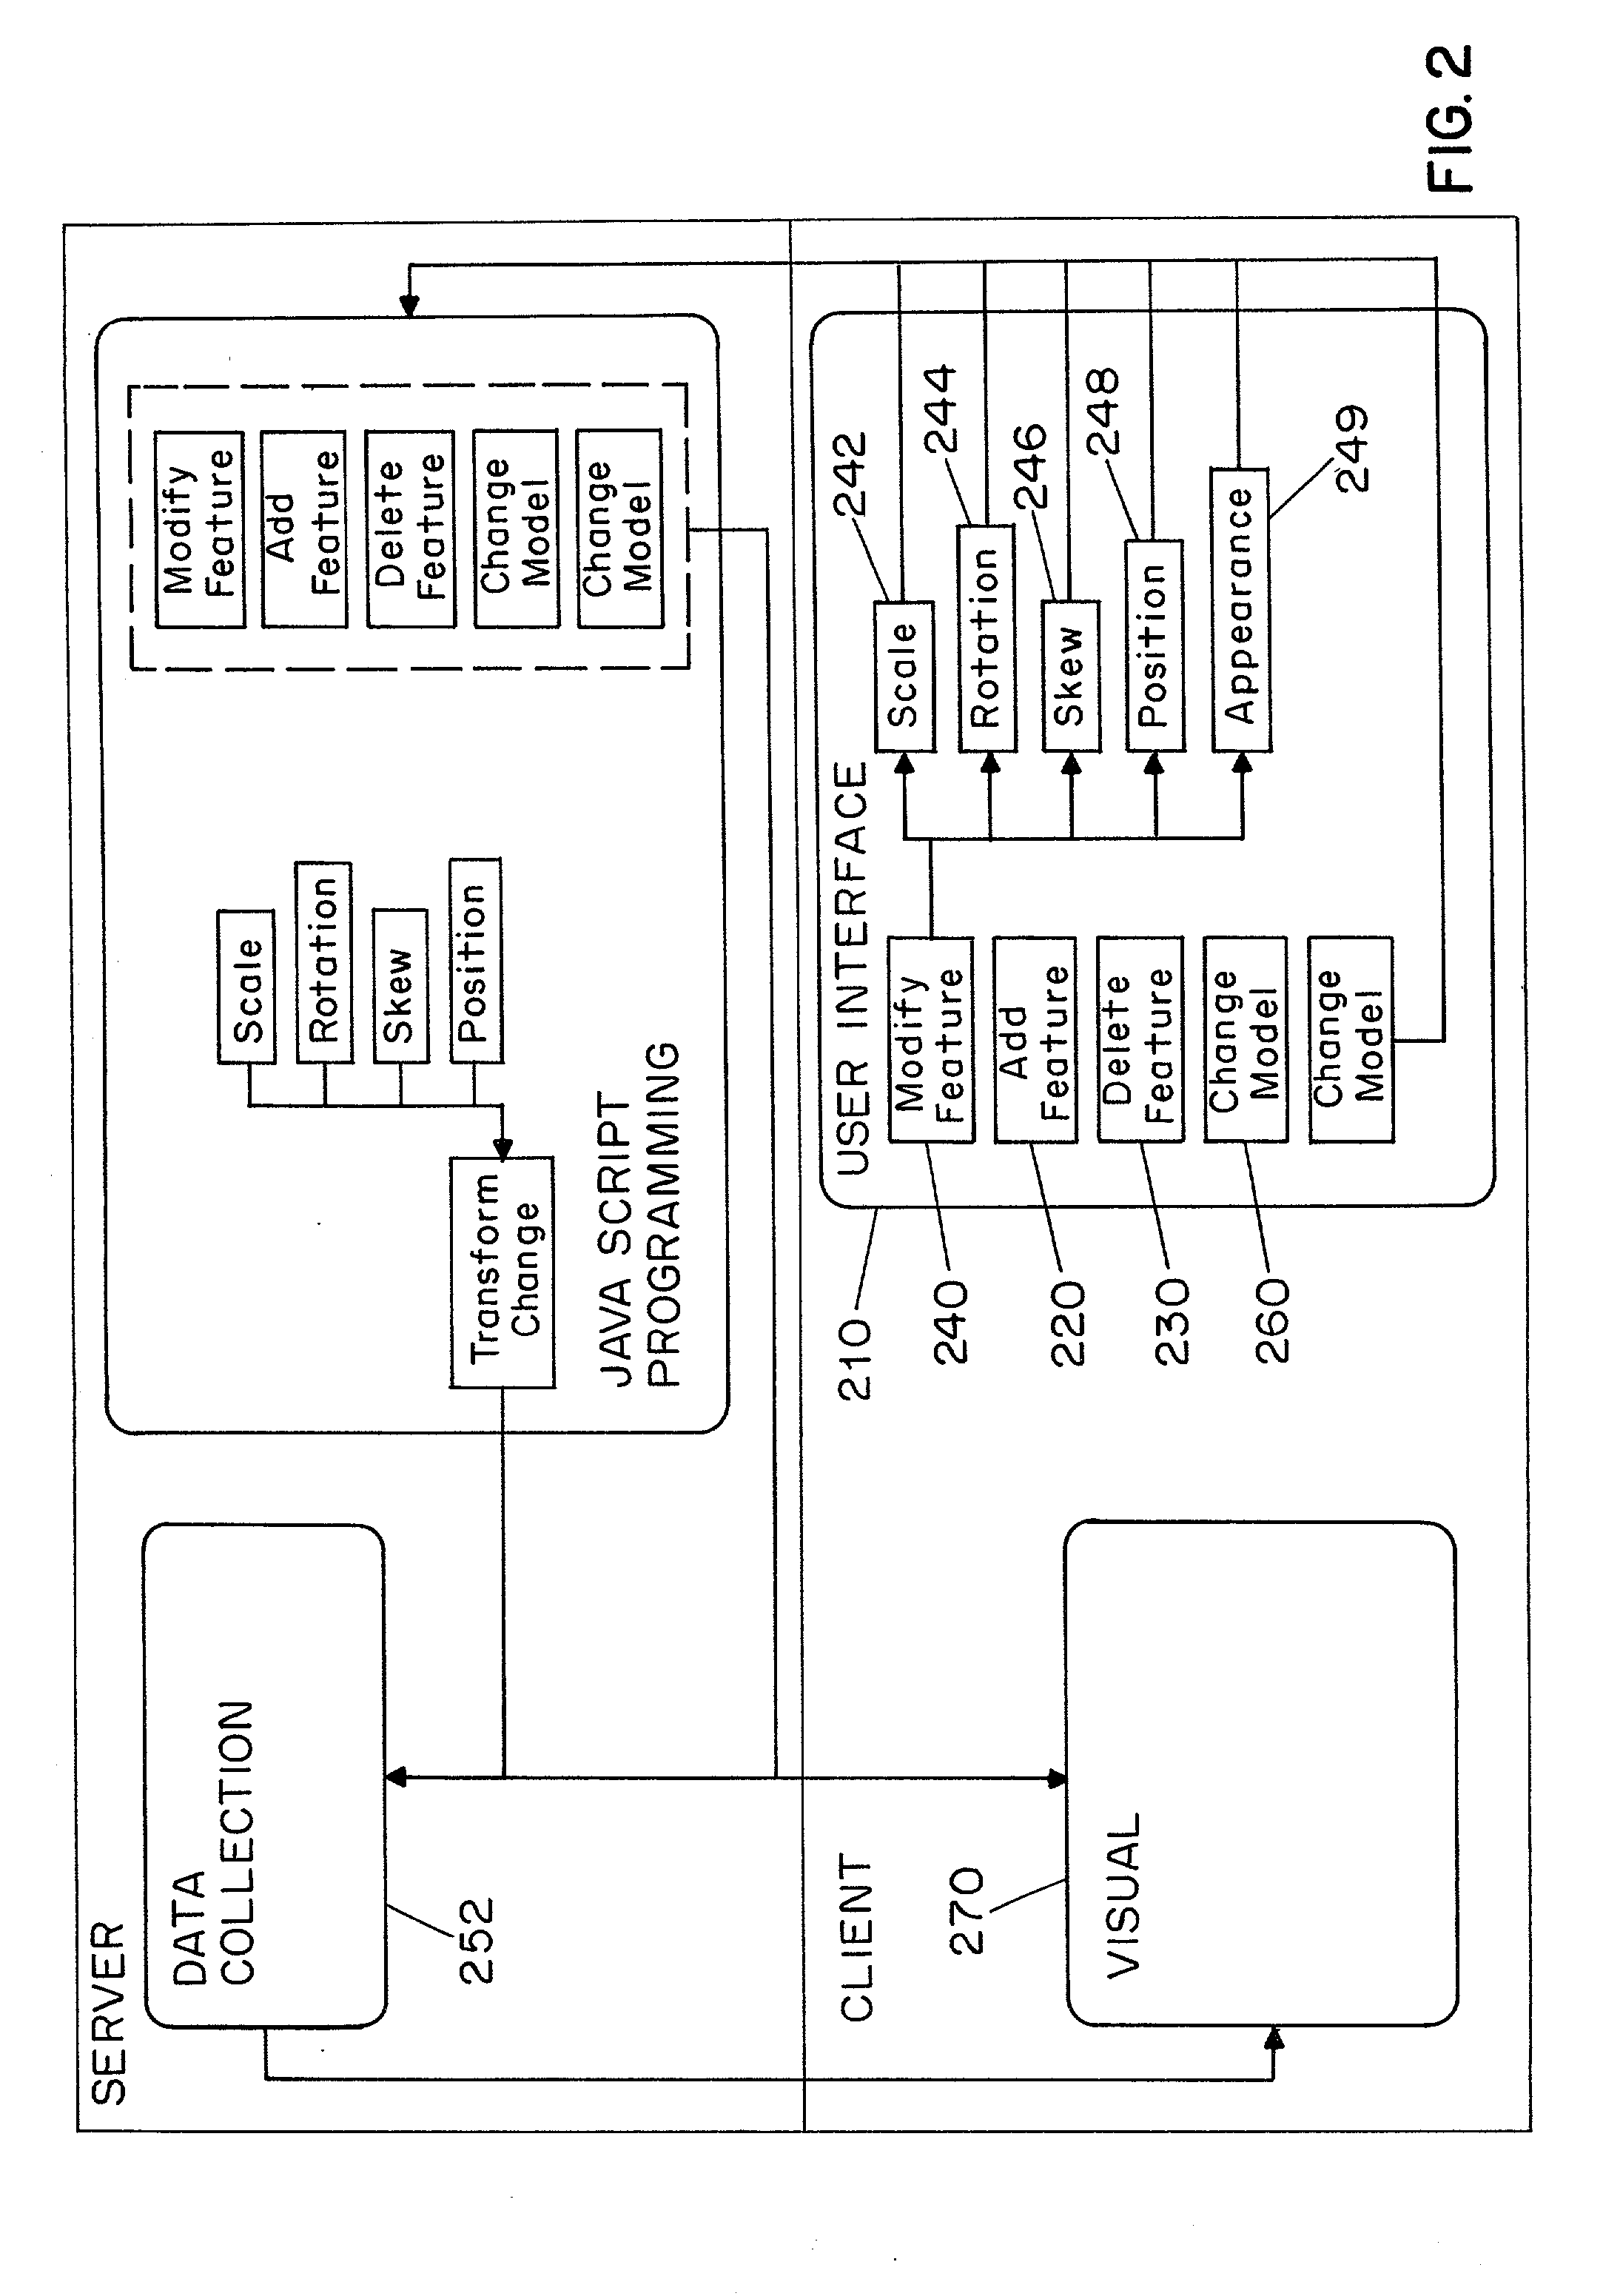 Method and apparatus for interactive online modelling and evaluation of a product